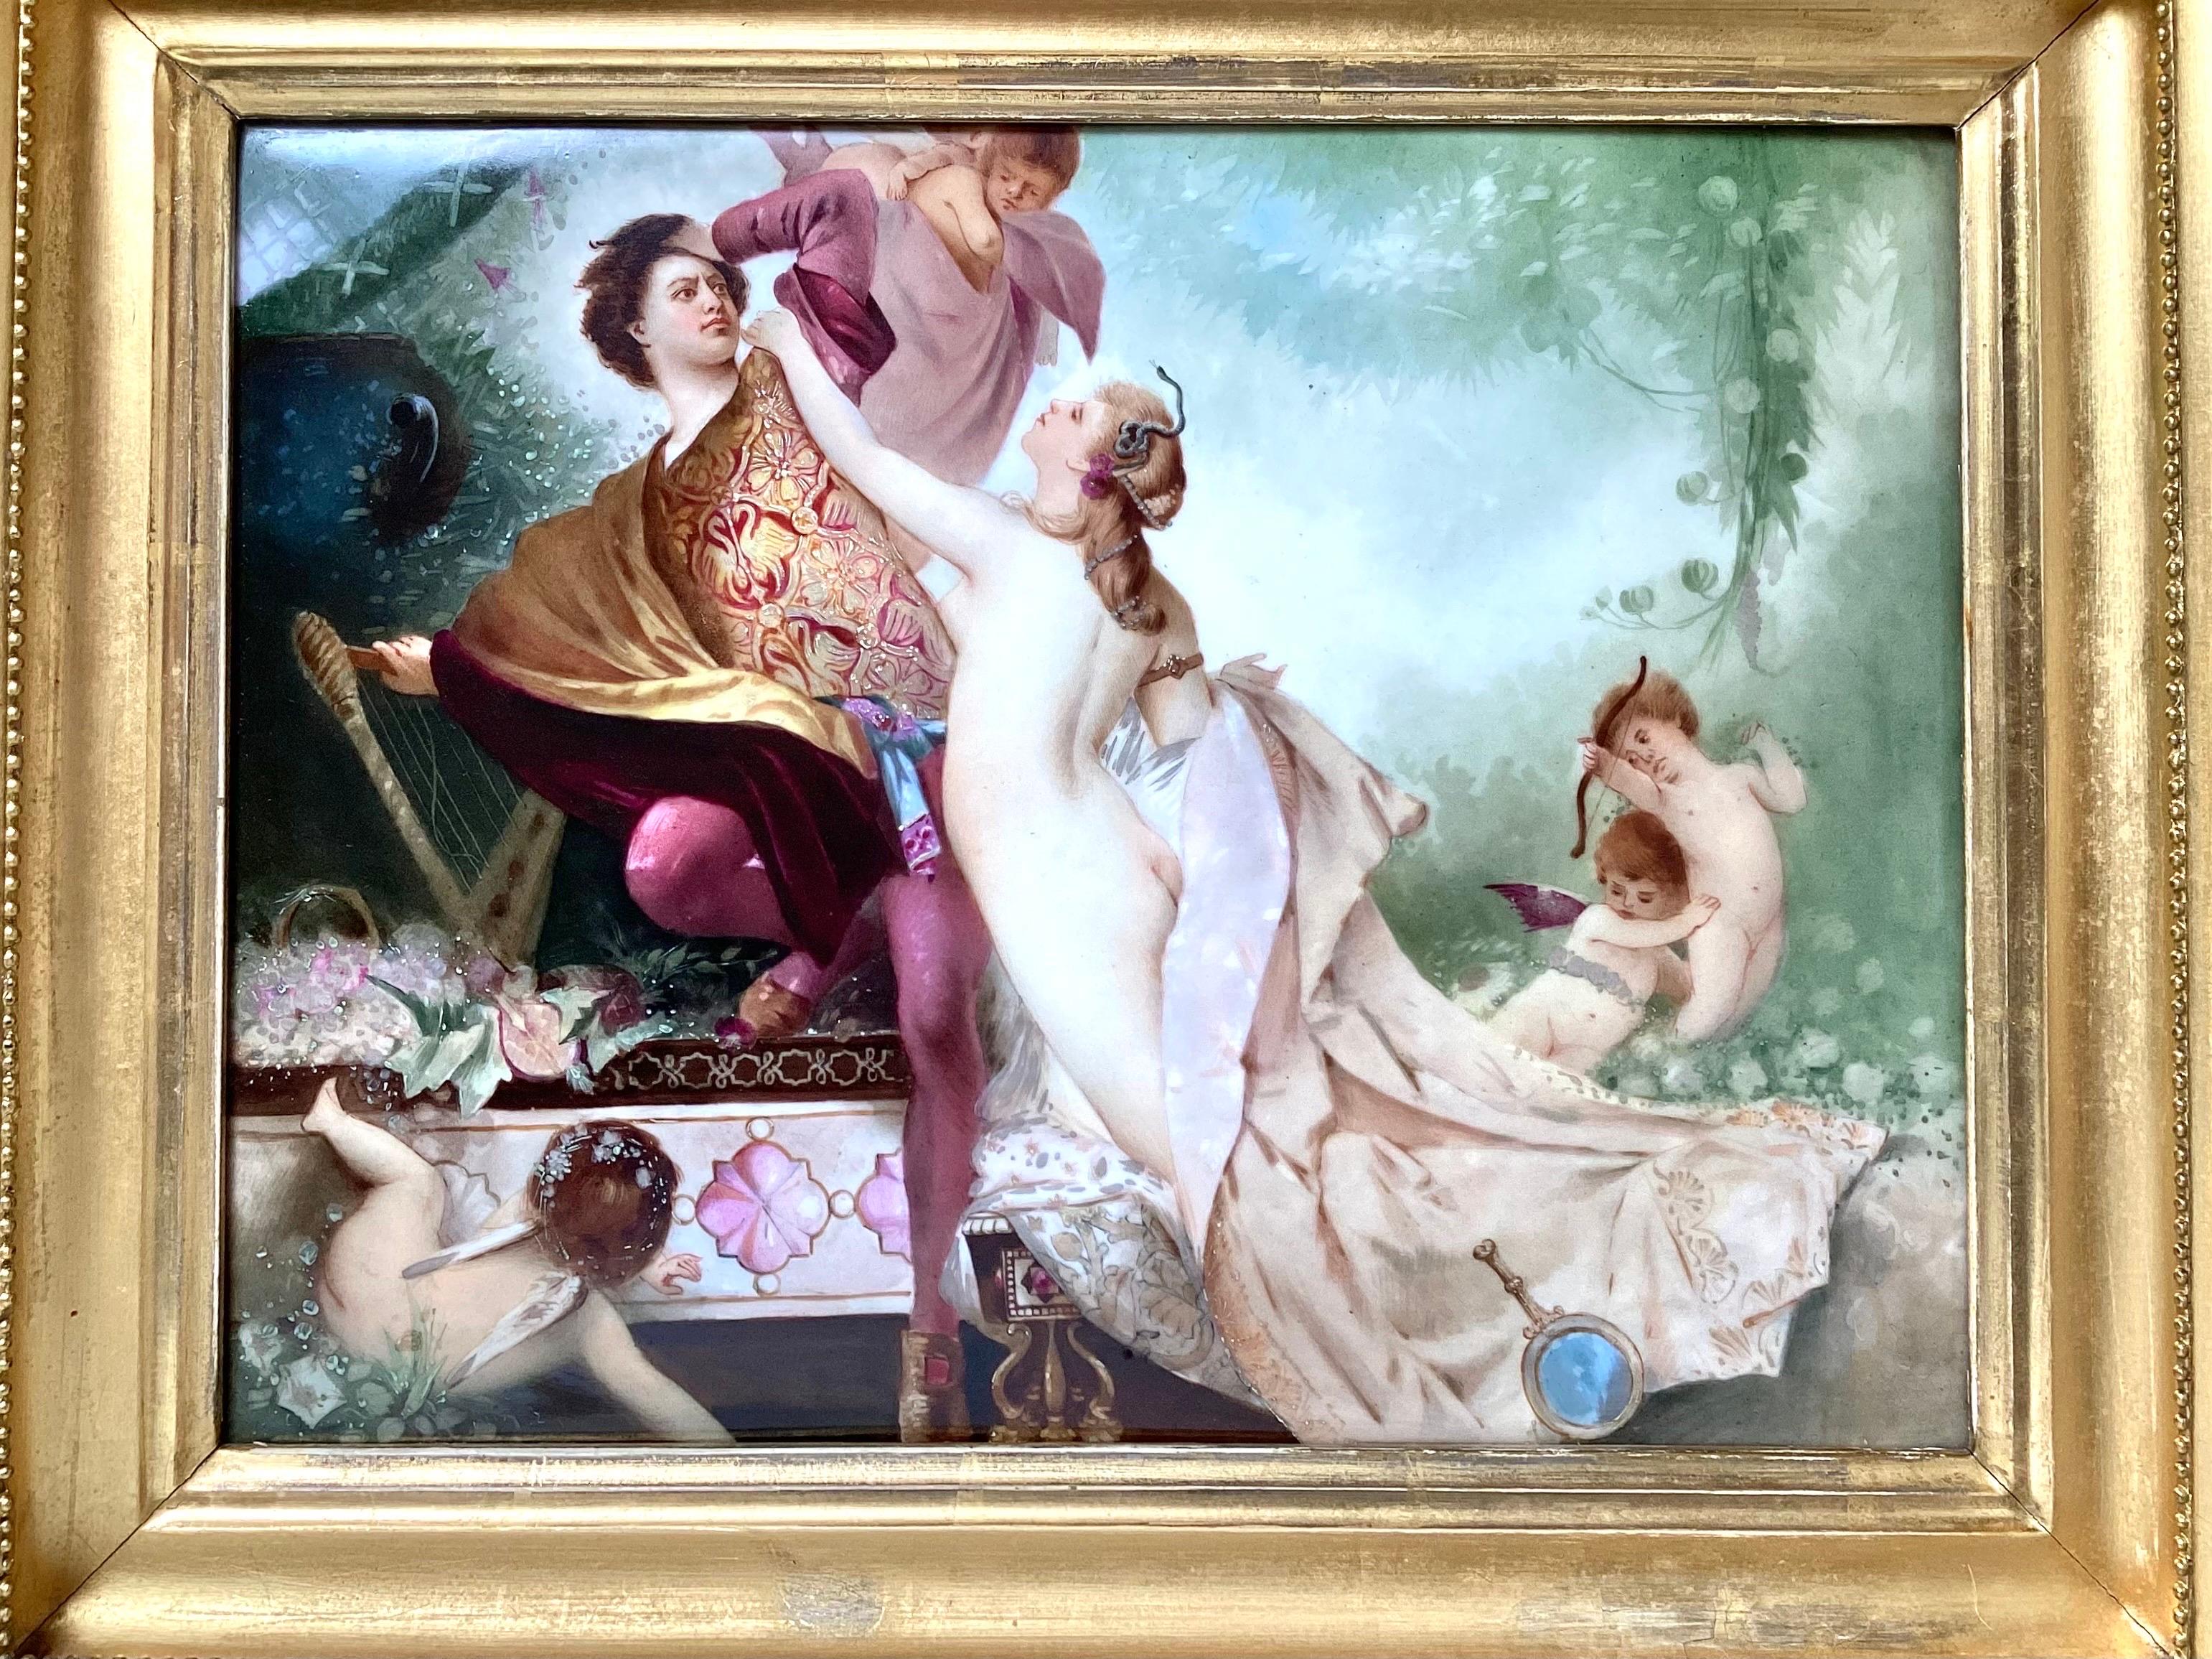 A painting on porcelain of a nobleman and nude woman with cupids, elaborately painted and highly detailed. The original gilt wood frame with reticulated outer frame. The quality of painting is excellent with the initials of the Artist on back. The